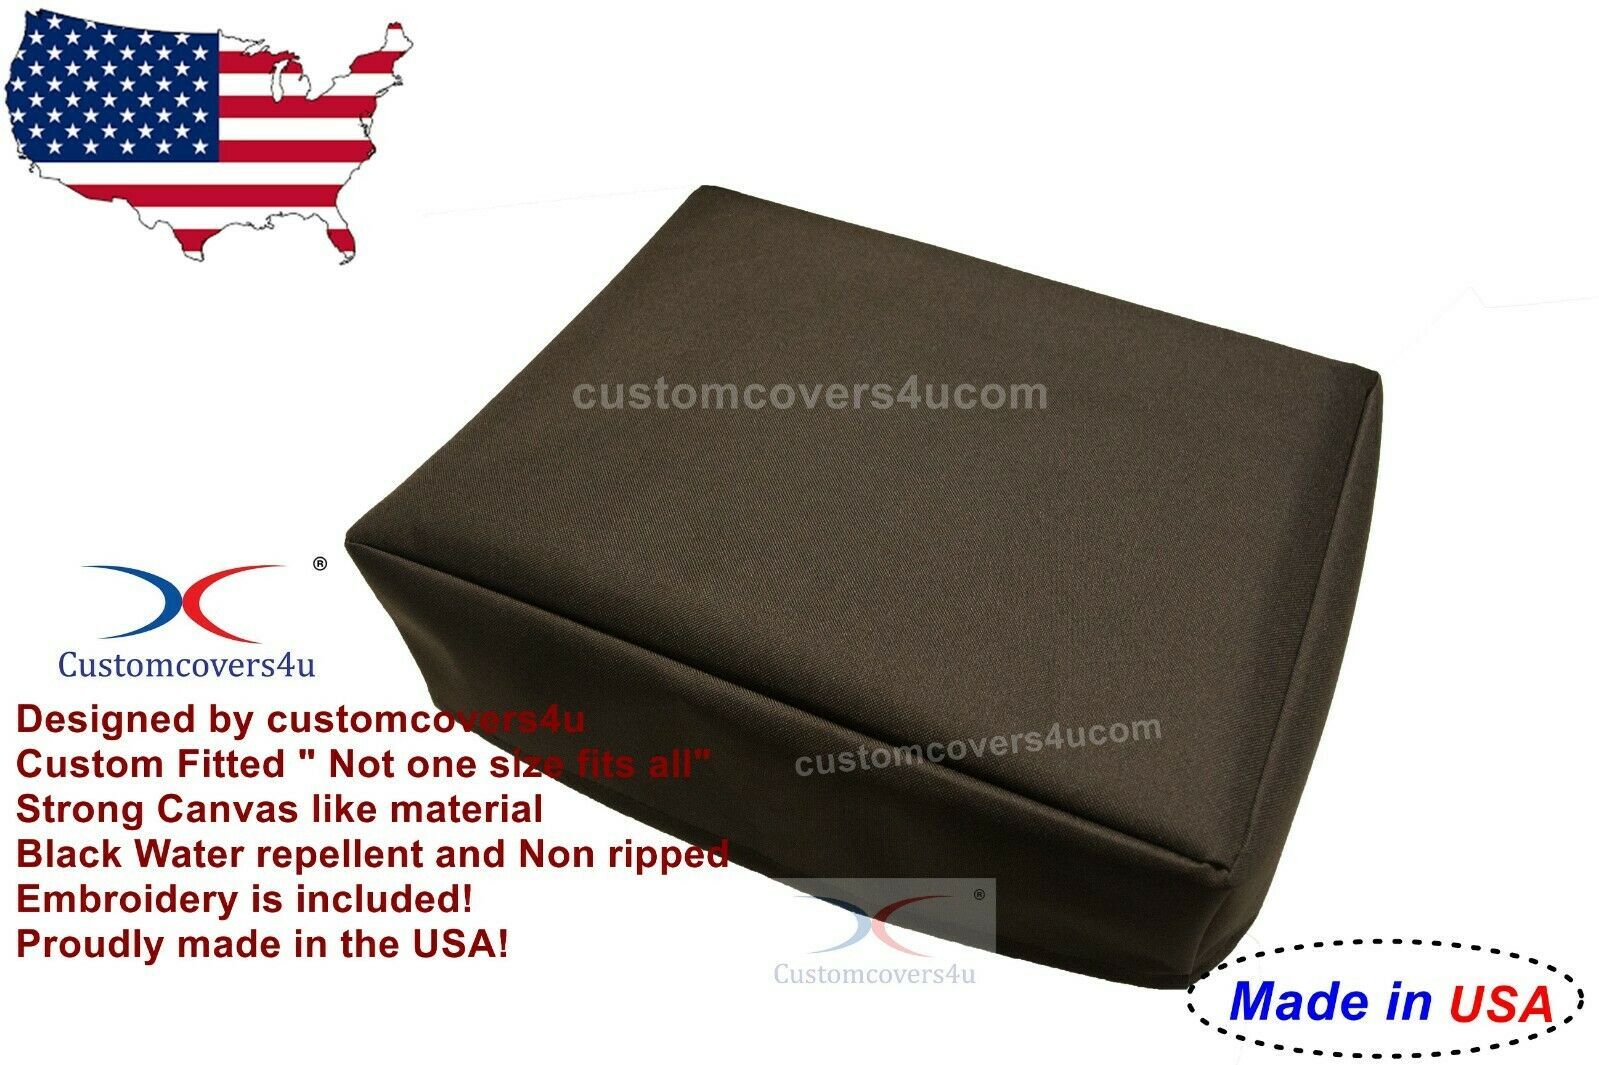 Custom Dust Cover Protector For DENON AVR X4700 Amplifier + Embroidery ! - $25.64